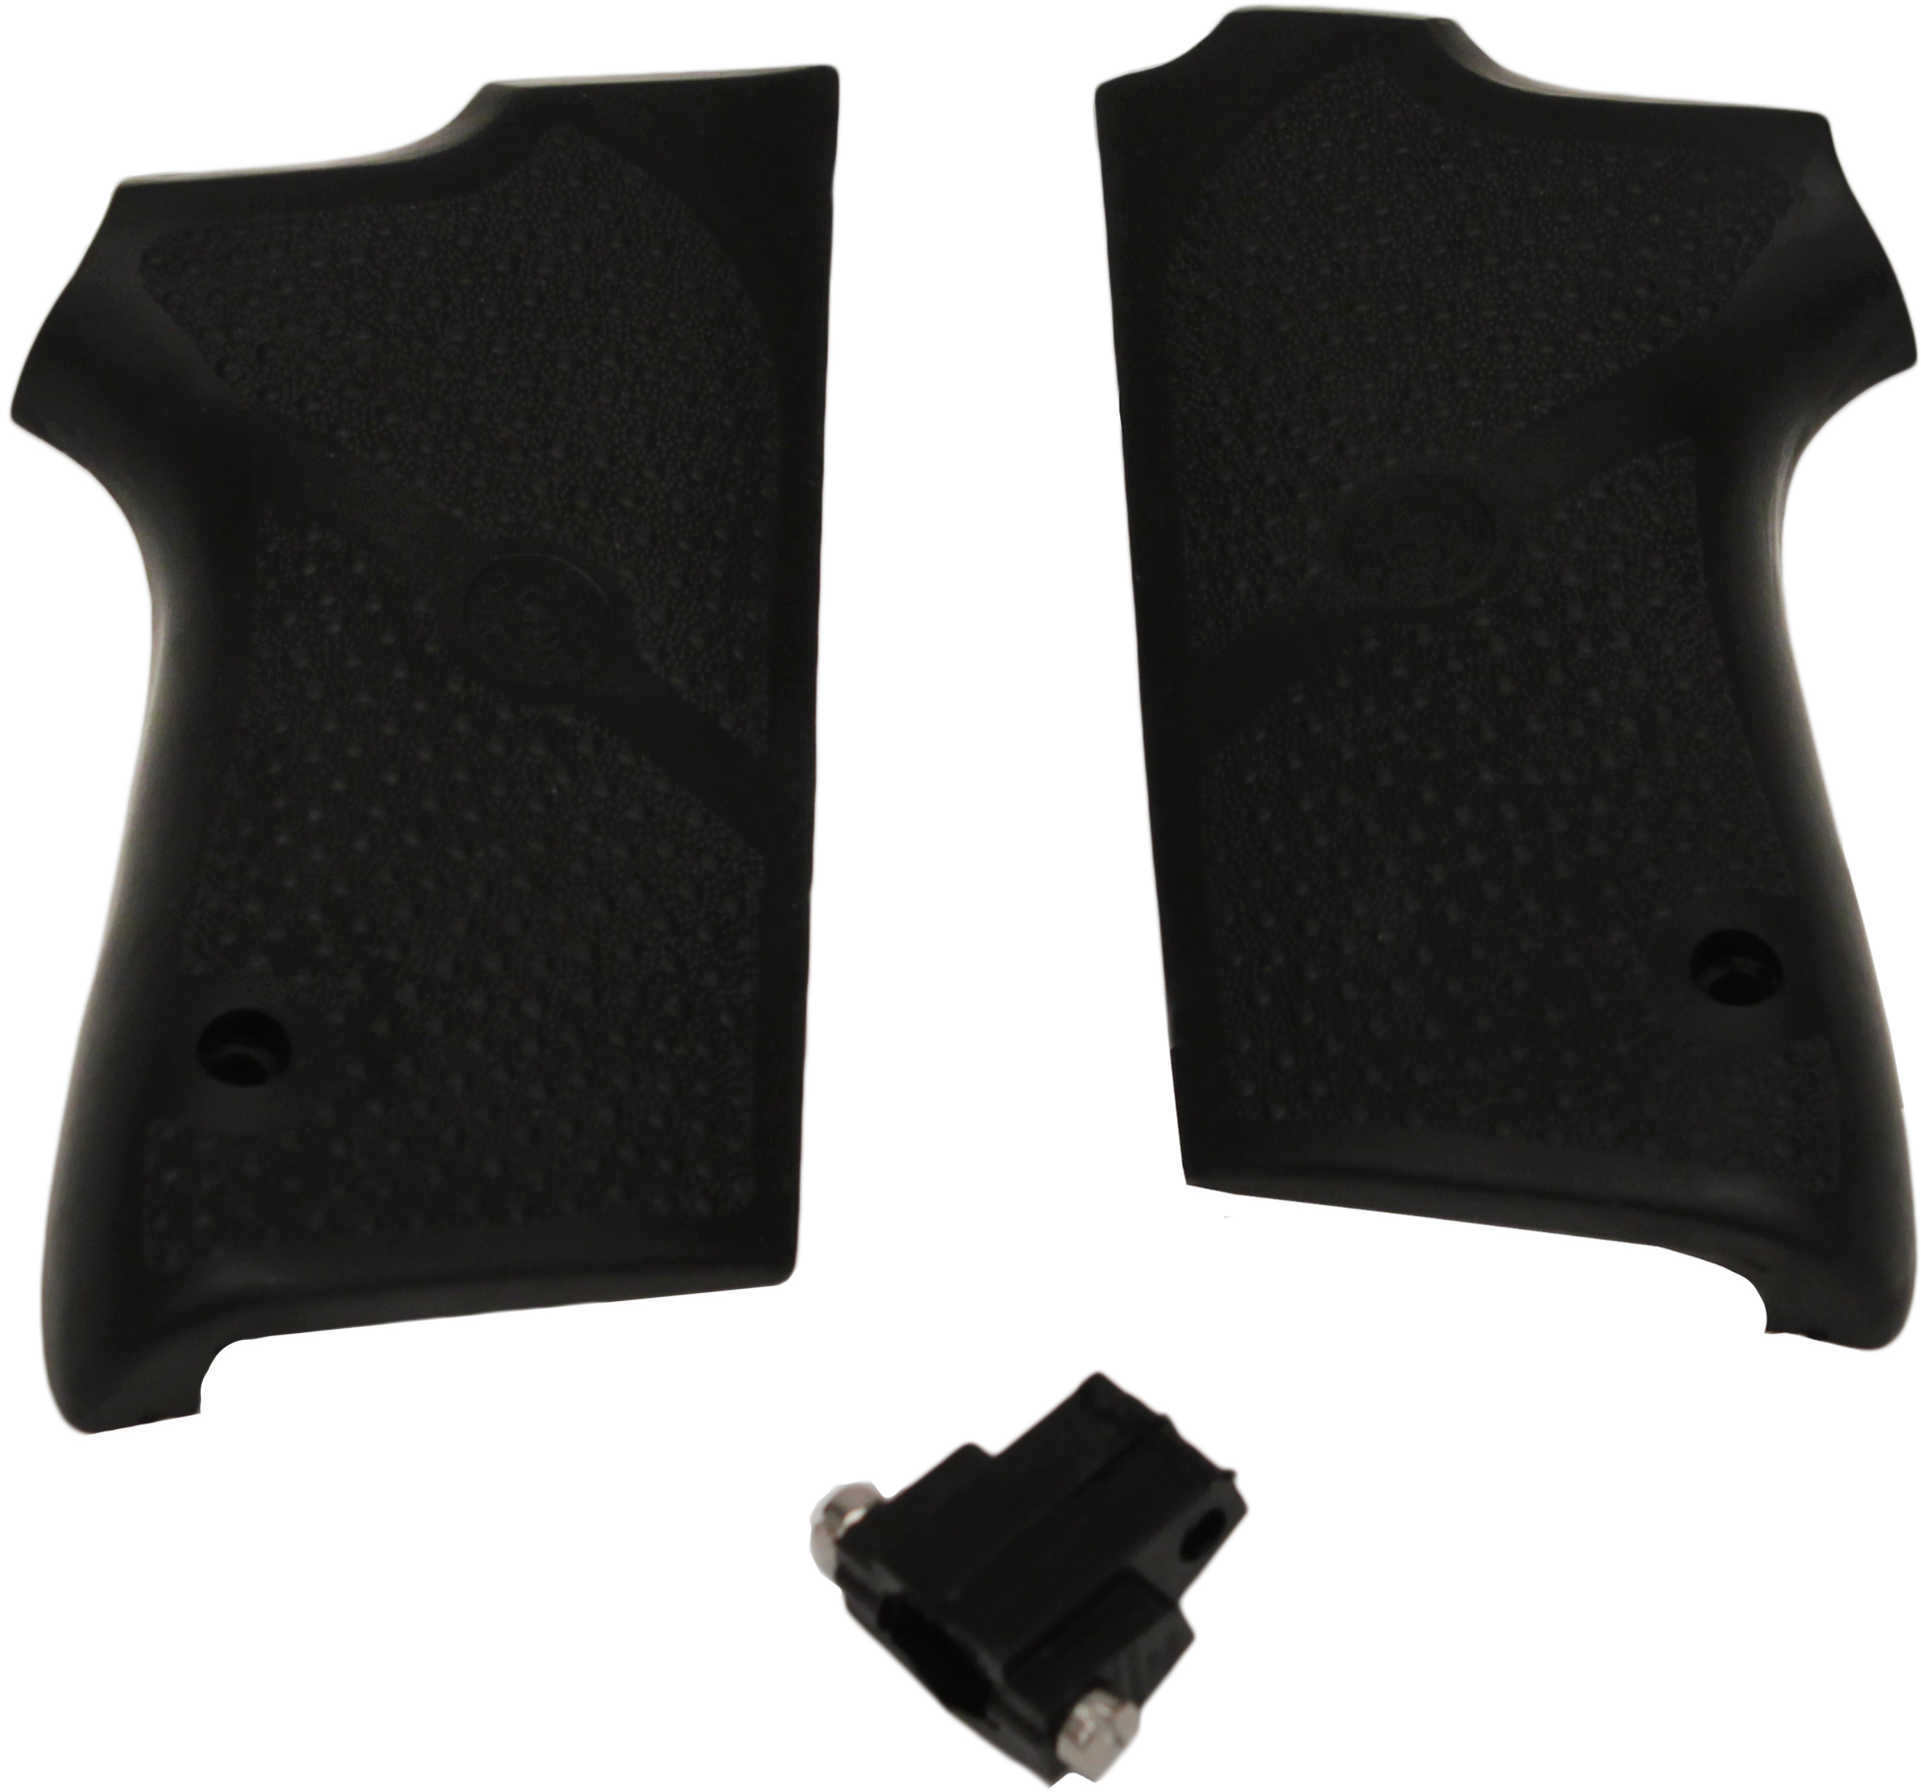 Hogue Standard Grips Smith & Wesson 3913 Series Md: 13010